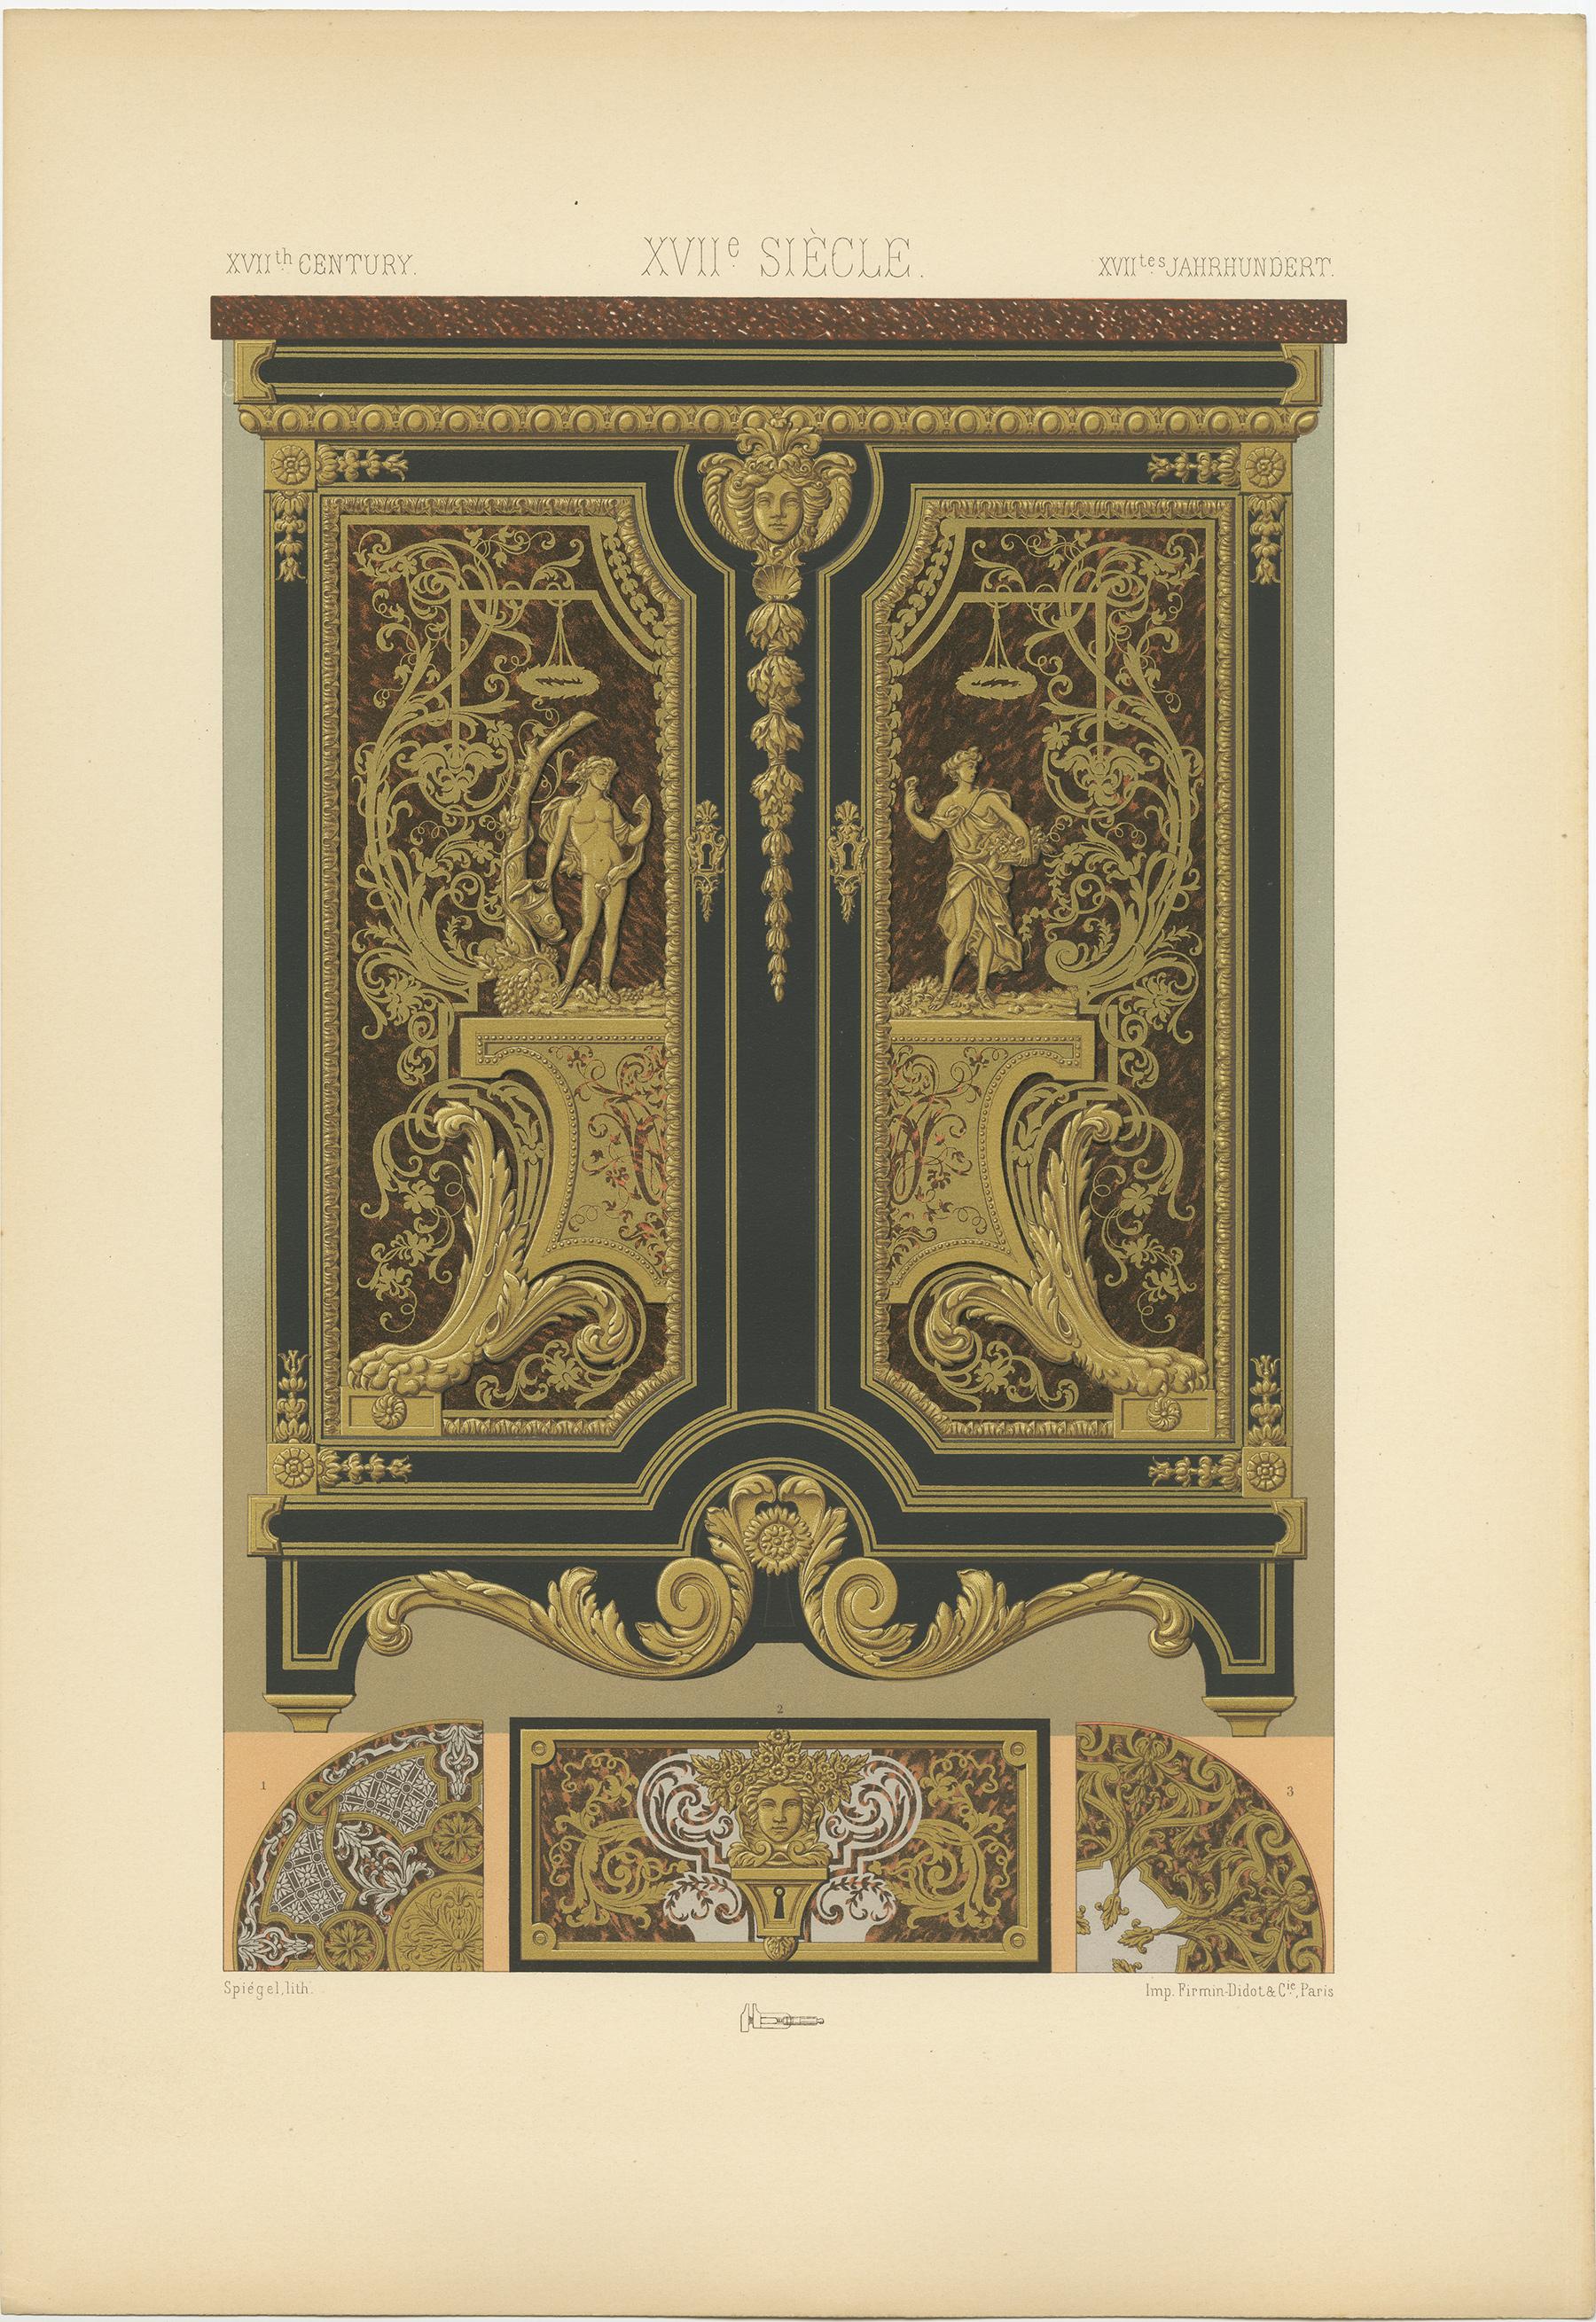 Antique print titled '17th Century - XVIIc Siècle - XVIILes Jahrhundert'. Chromolithograph of metallic inlay from furniture, France ornaments. This print originates from 'l'Ornement Polychrome' by Auguste Racinet. Published circa 1890.